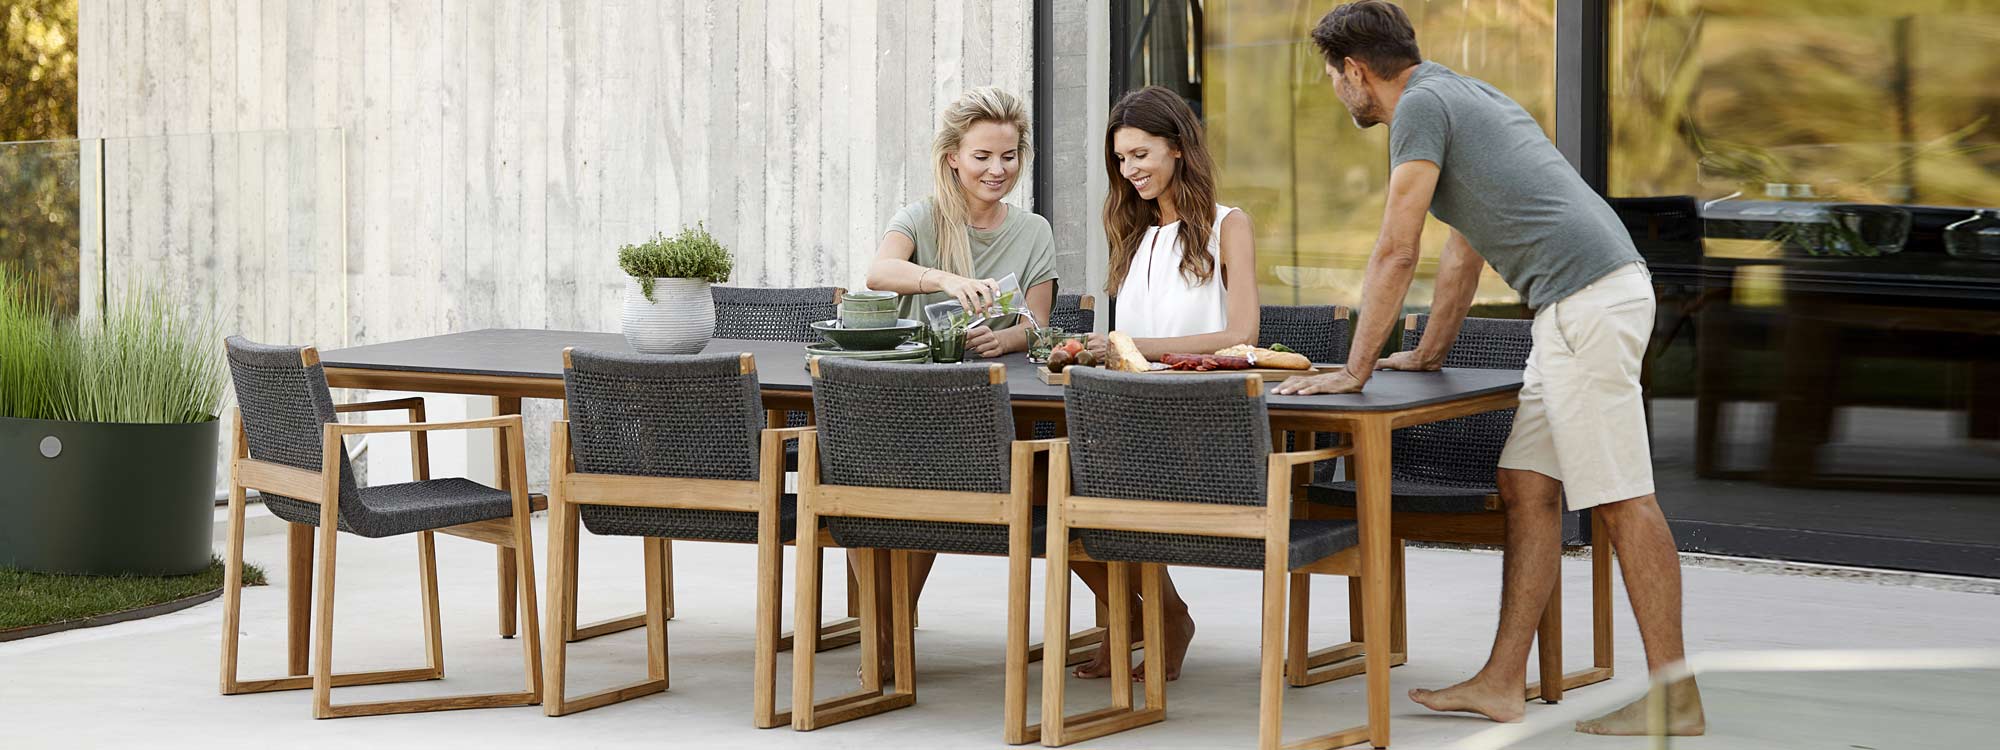 Endless garden carver chair is a modern outdoor dining chair in luxury quality outdoor materials by Cane-line garden furniture company.